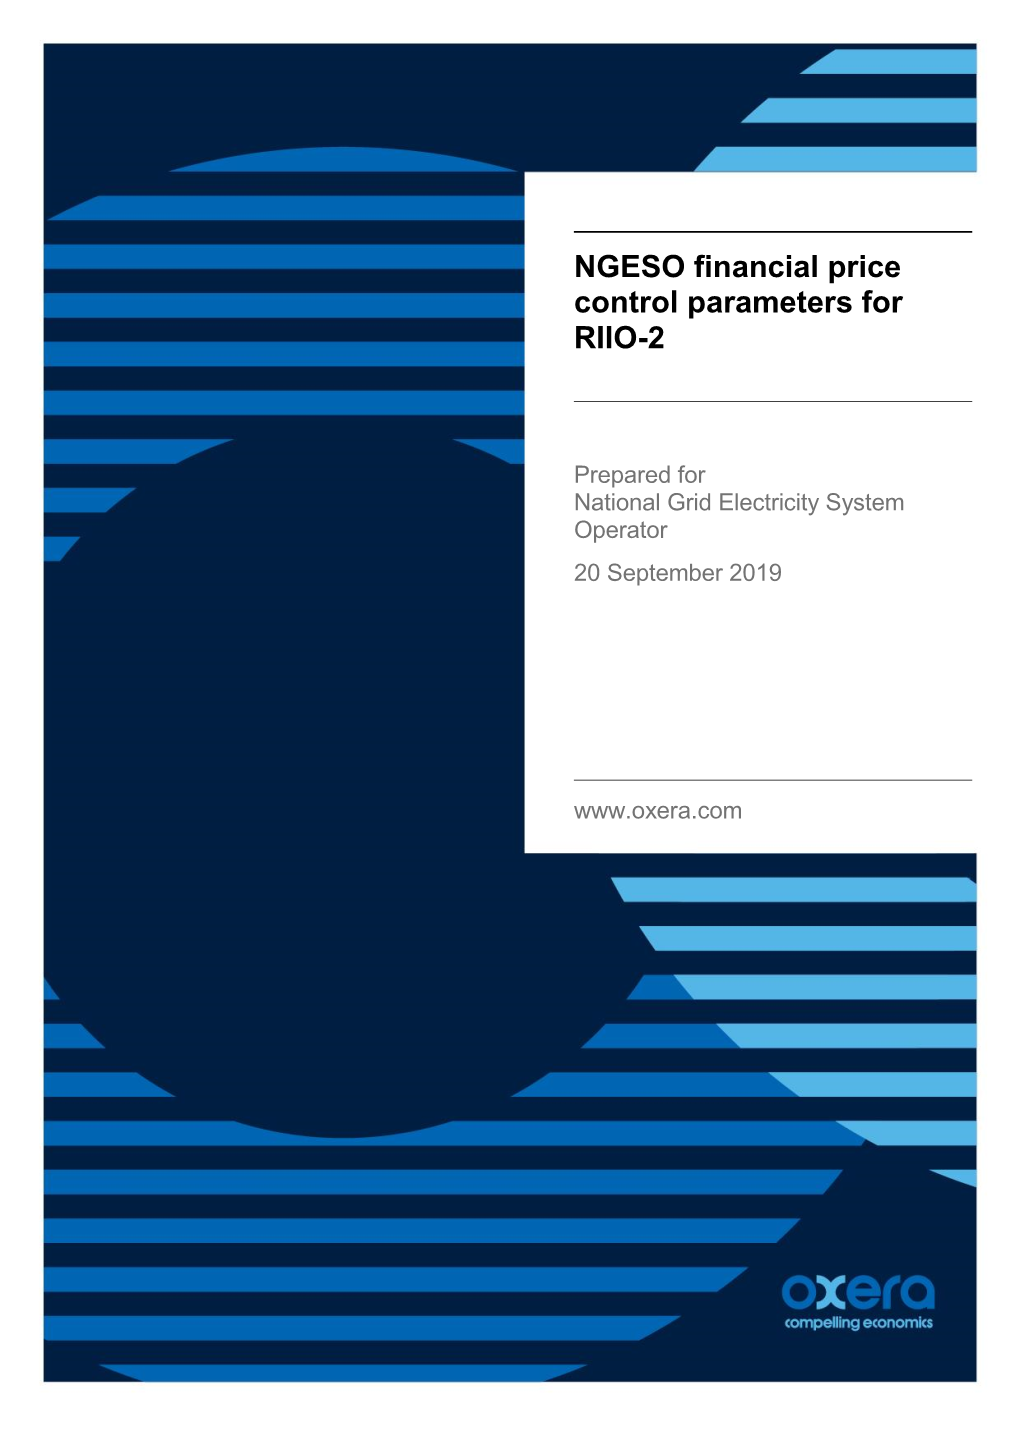 NGESO Financial Price Control Parameters for RIIO-2